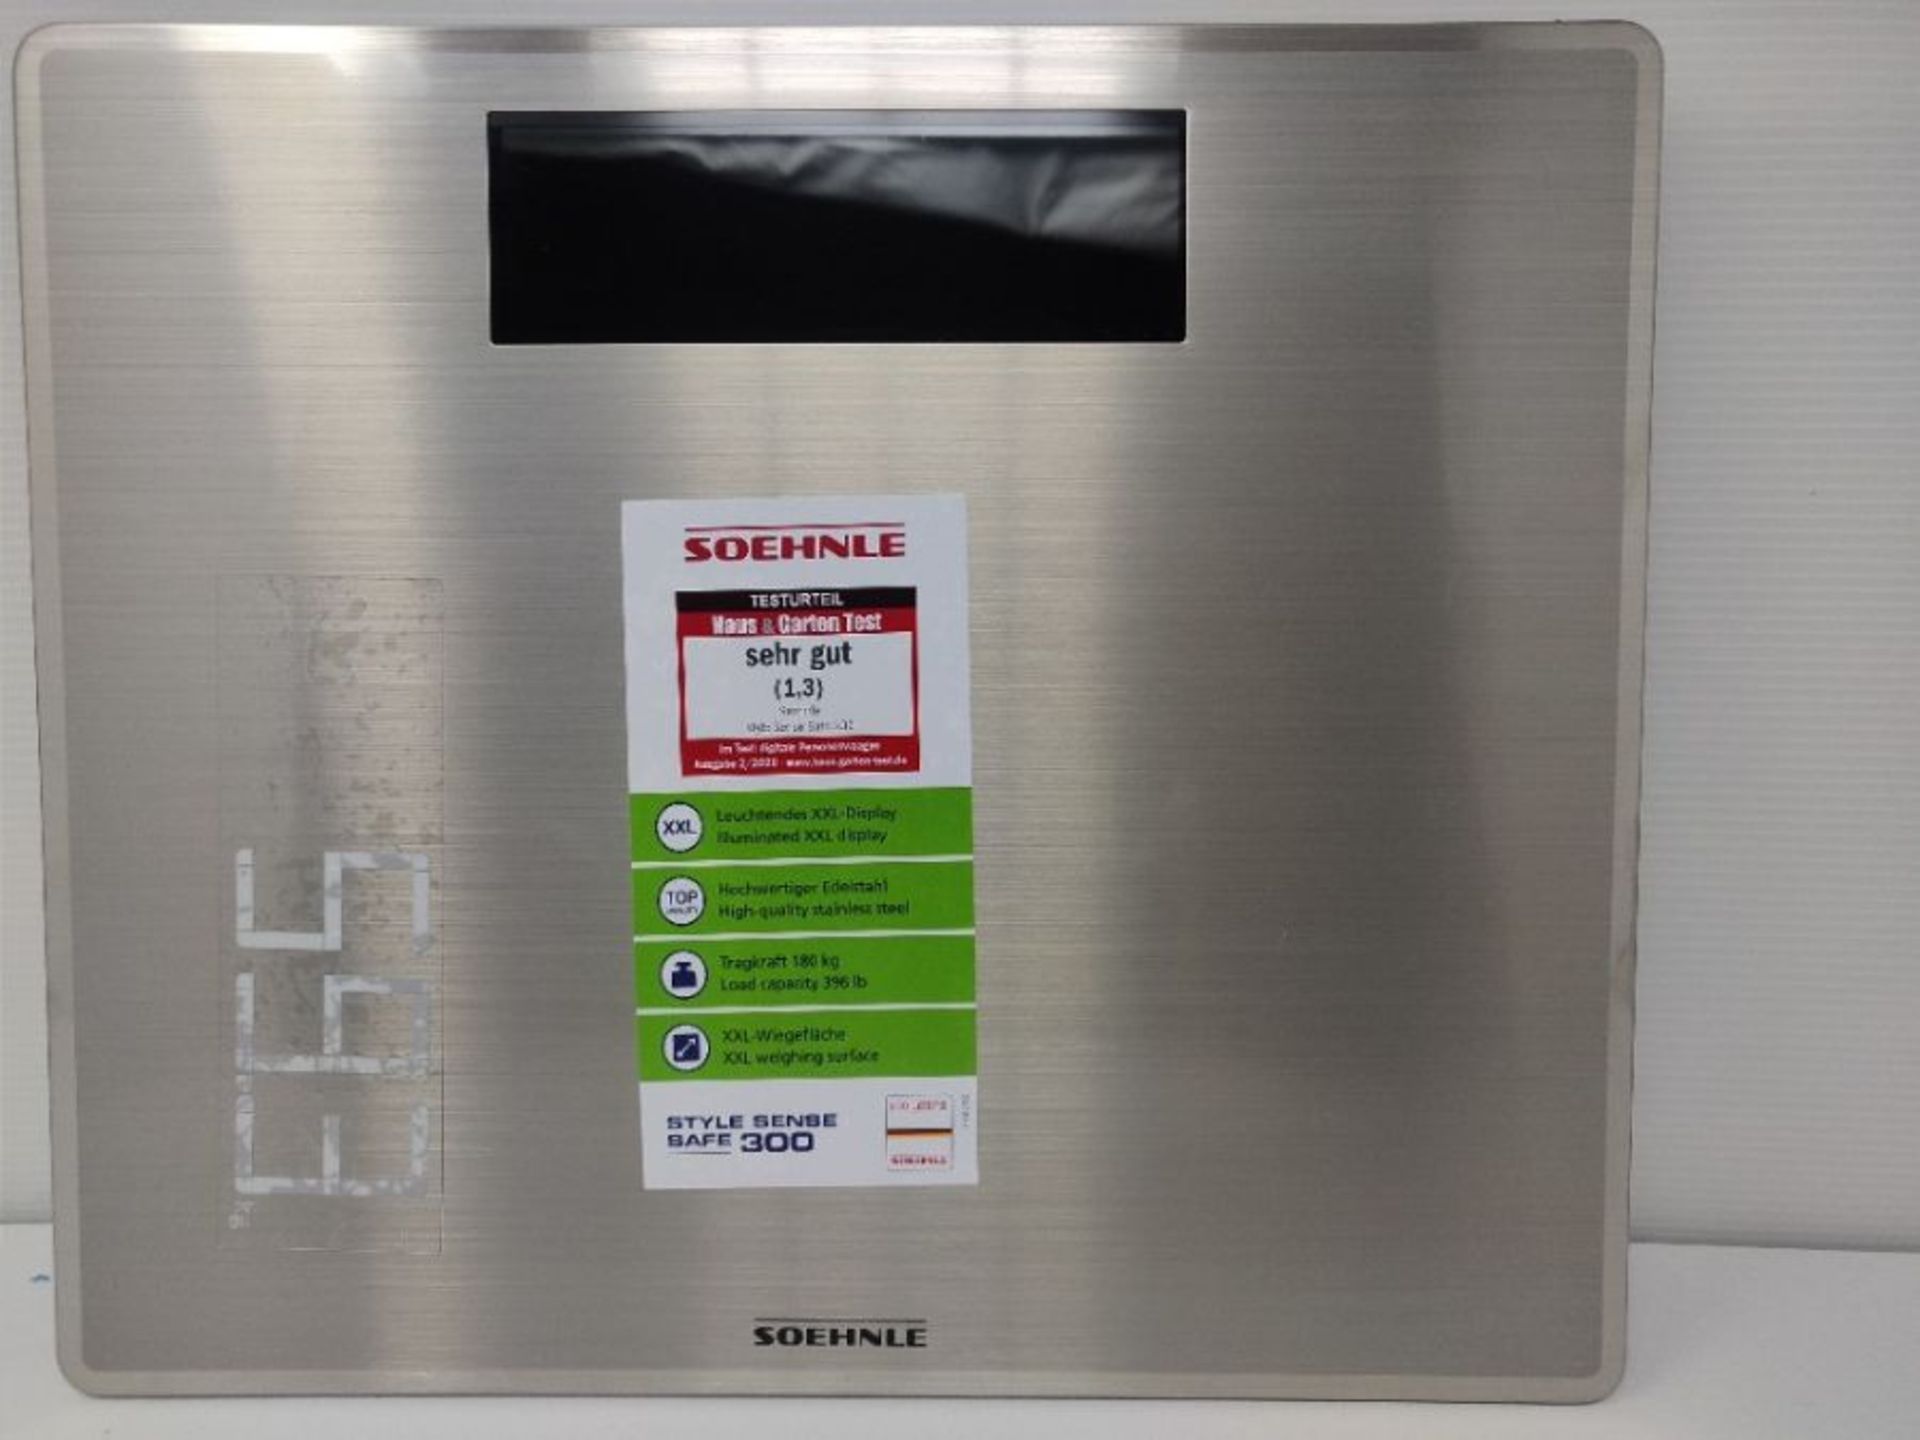 Soehnle Style Sense Safe 300 Digital Scale, Bathroom Scale with XL LED Screen and Extr - Image 2 of 2